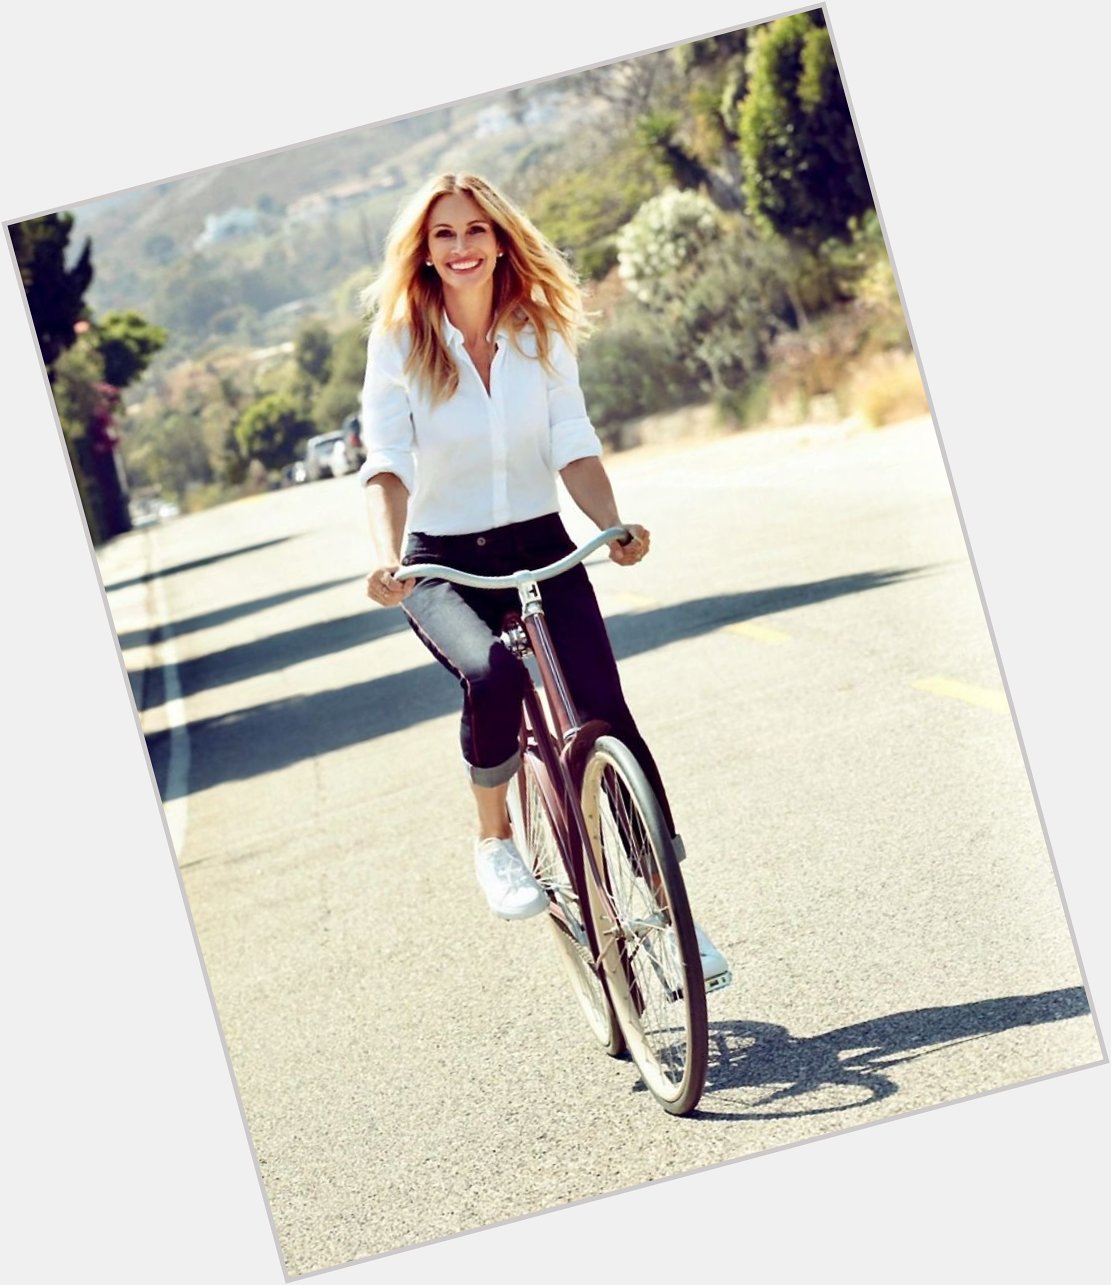  Rides A Bike
Julia Roberts\ birthday today, October 28. Happy bicycling! 